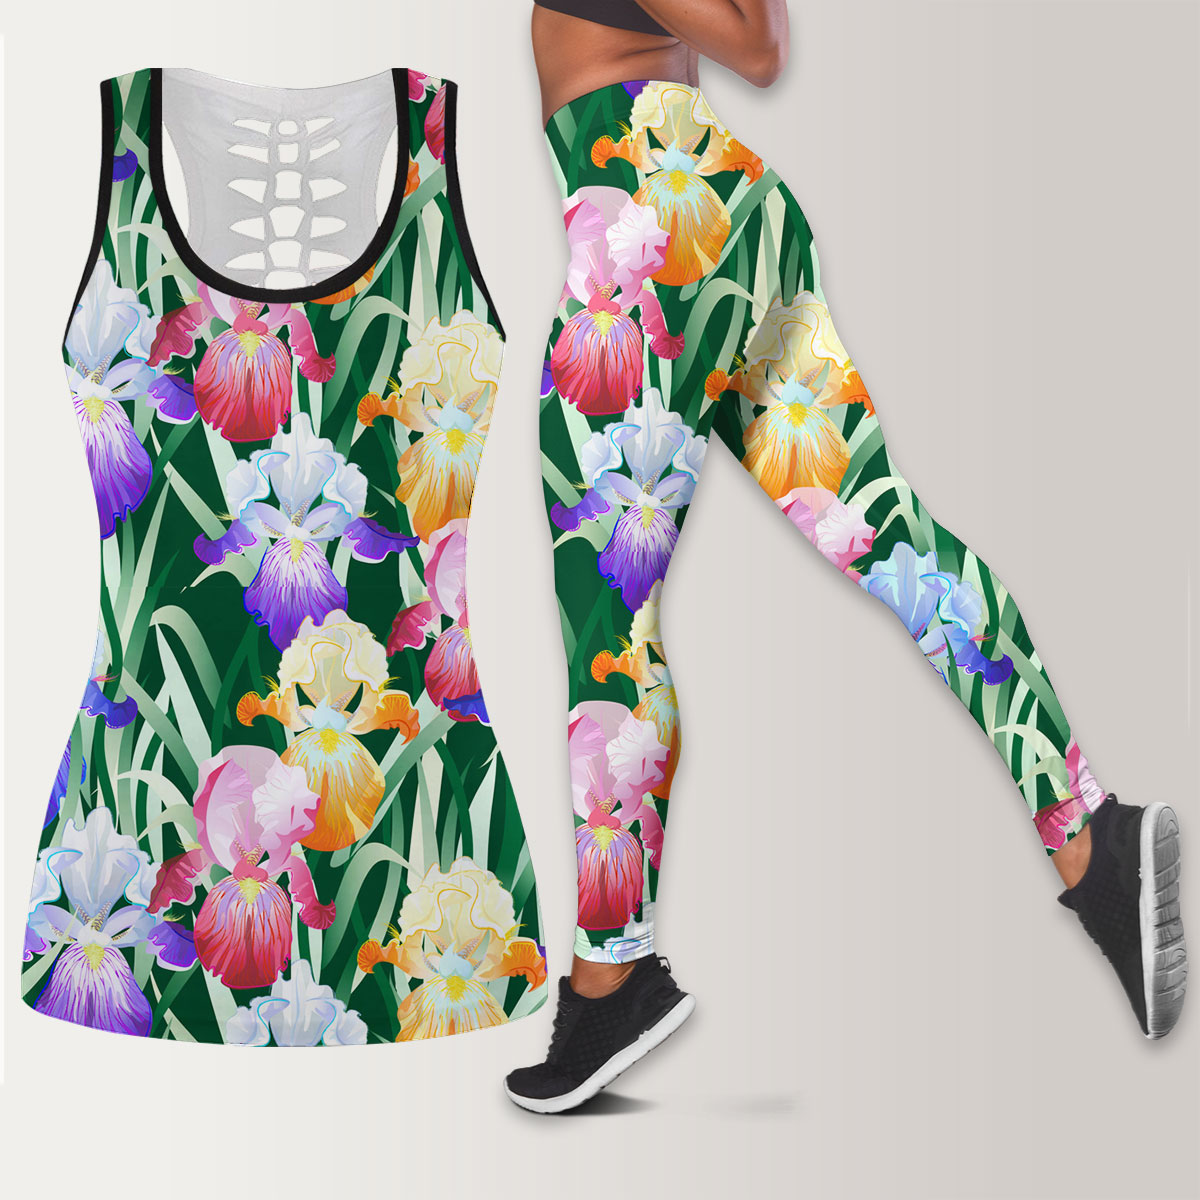 Colorful Iris Flowers And Green Leaves Legging Tank Top set